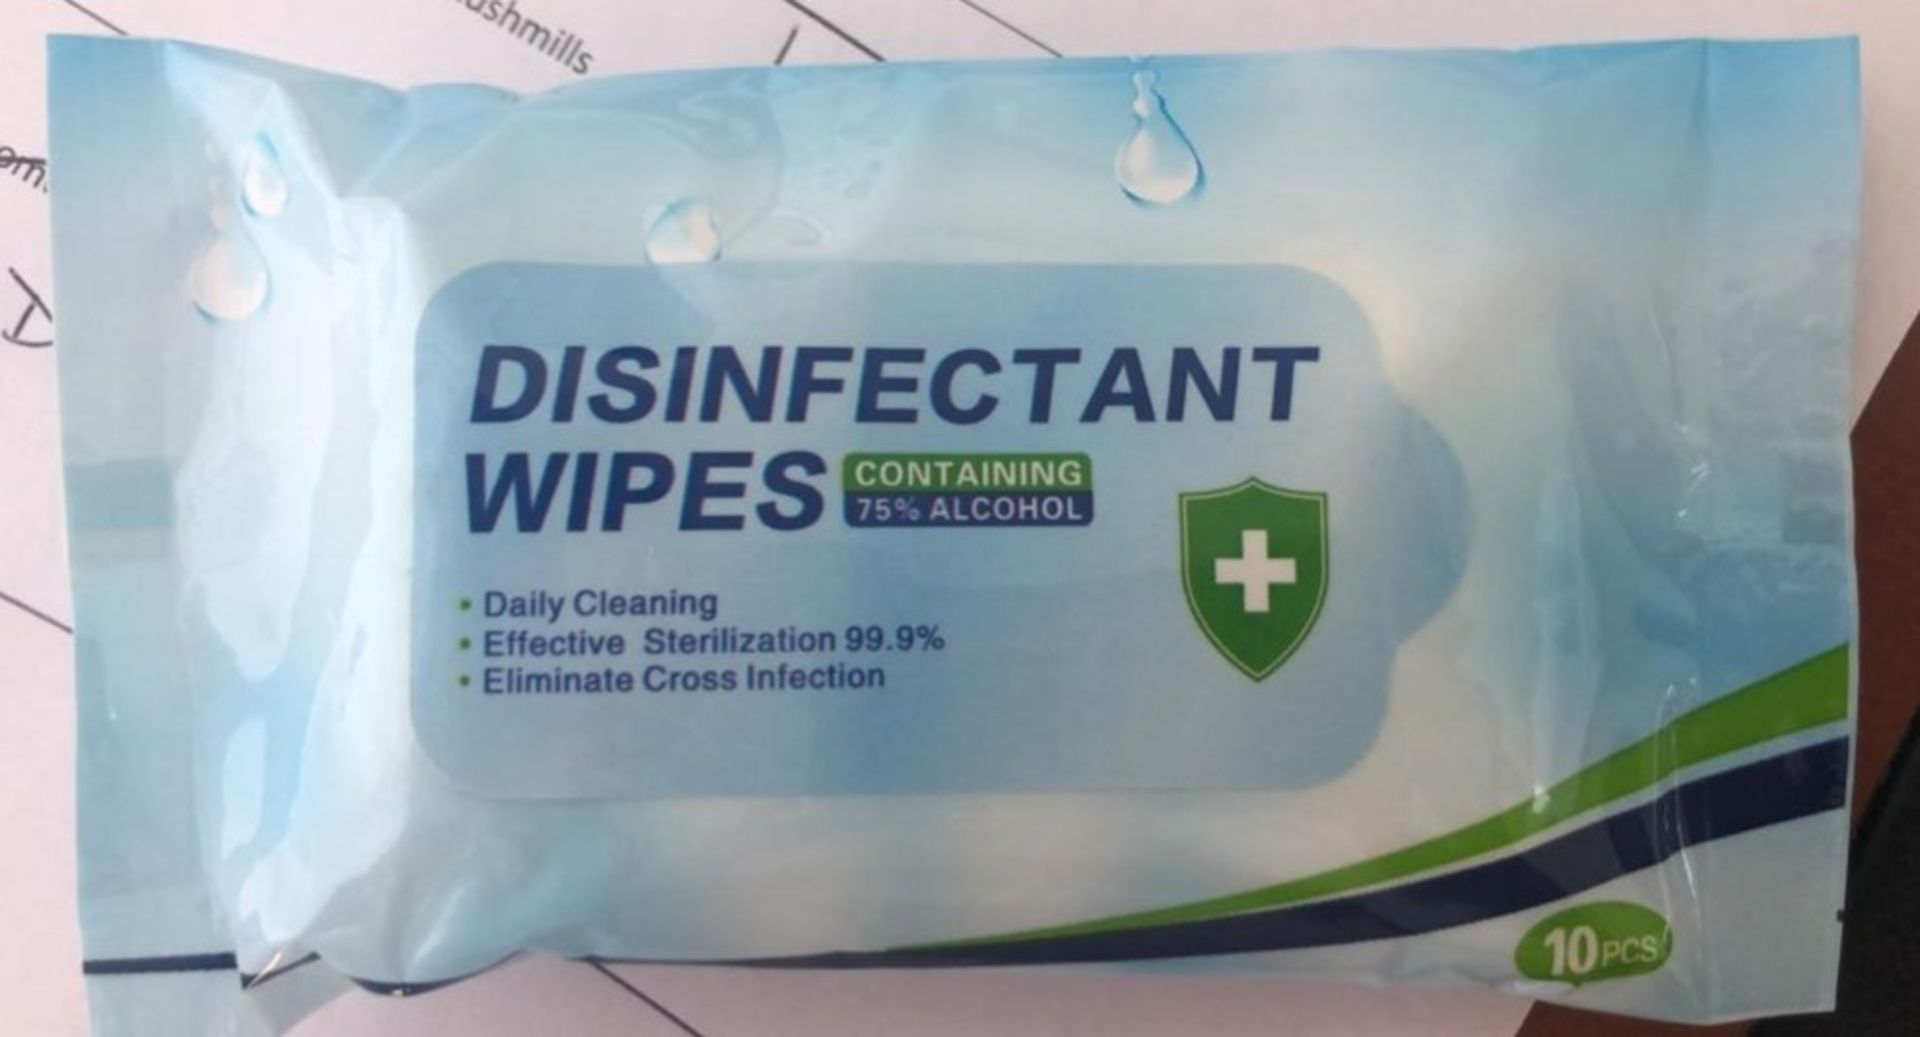 20,000 Antibacterial Disinfectant Wipes (75% Alcohol)